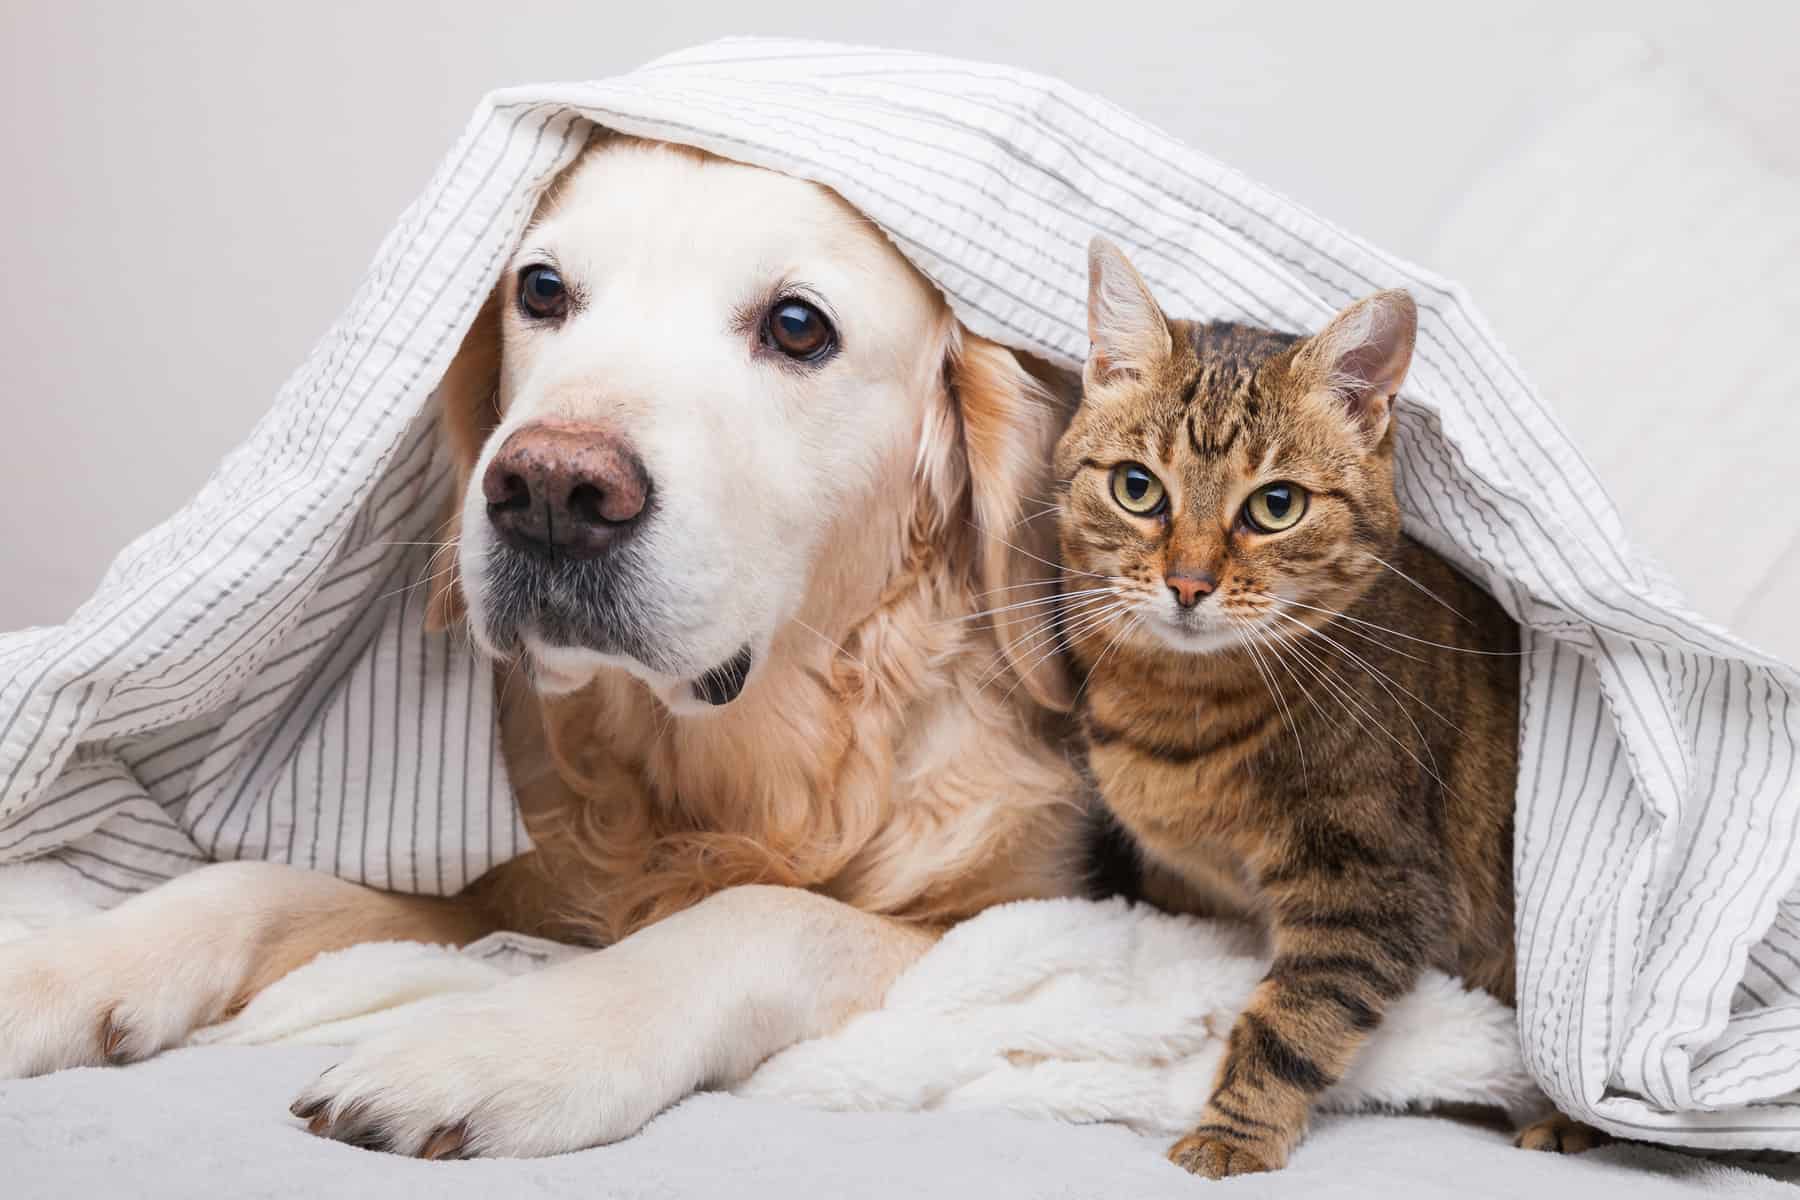 a dog and a cat are trying to stay warm under a makeshift mat and blanket